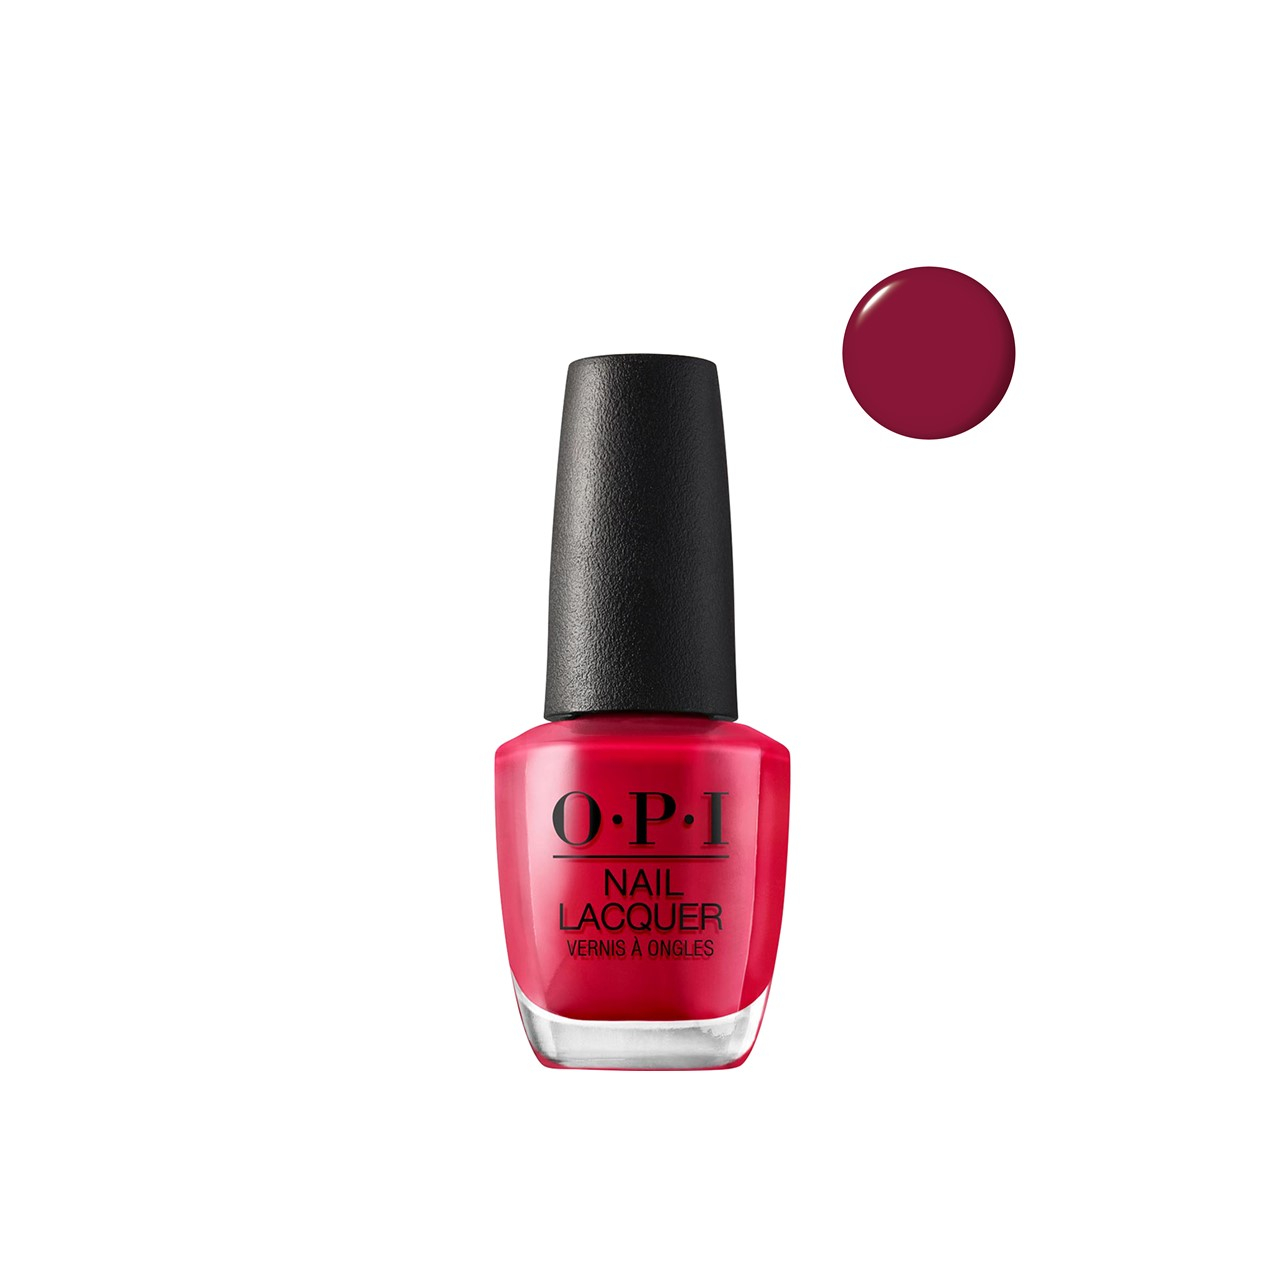 OPI Nail Lacquer OPI by Popular Vote 15ml (0.51fl oz)